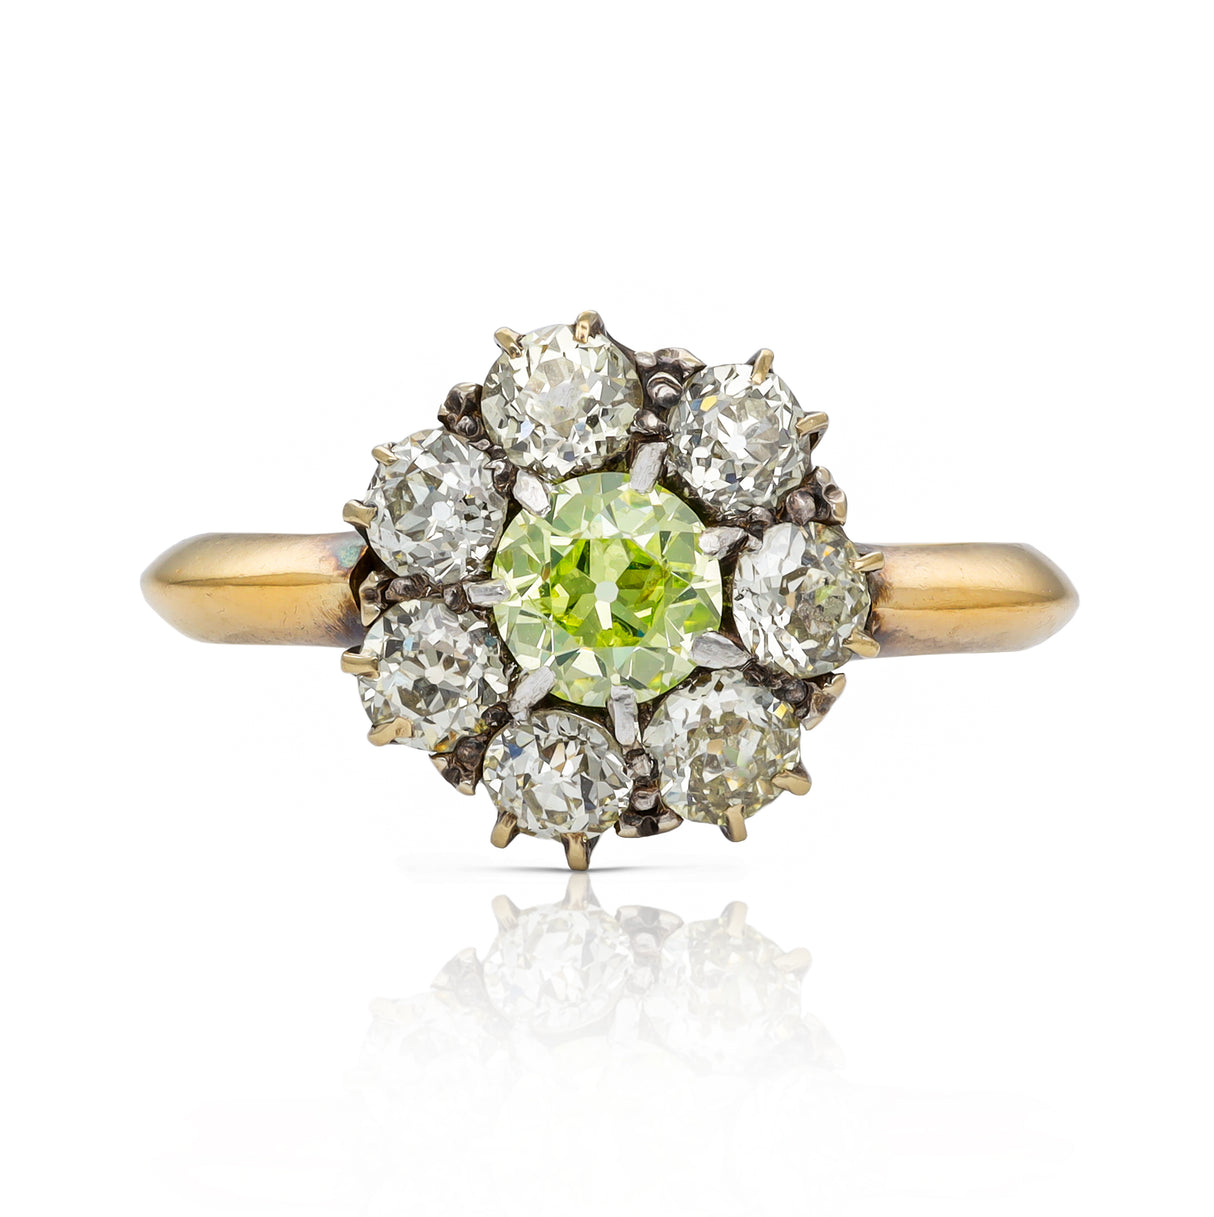 Antique Green-Yellow Diamond Cluster Engagement Ring, 18ct Yellow Gold